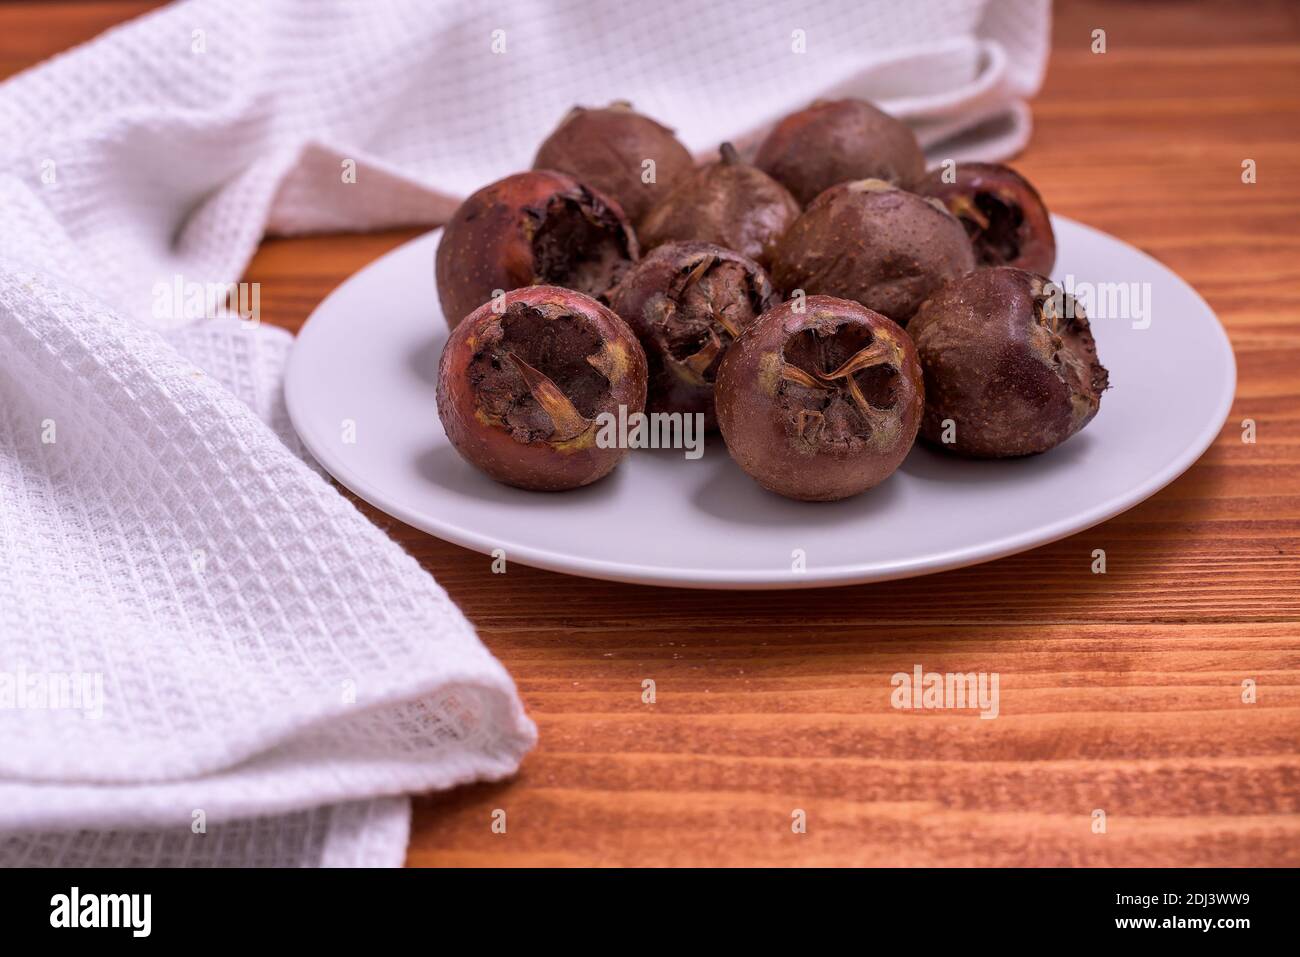 Fresh ripe organic common medlar fruit on a plate on wooden rustic background. Healthy food Mespilus germanica Stock Photo